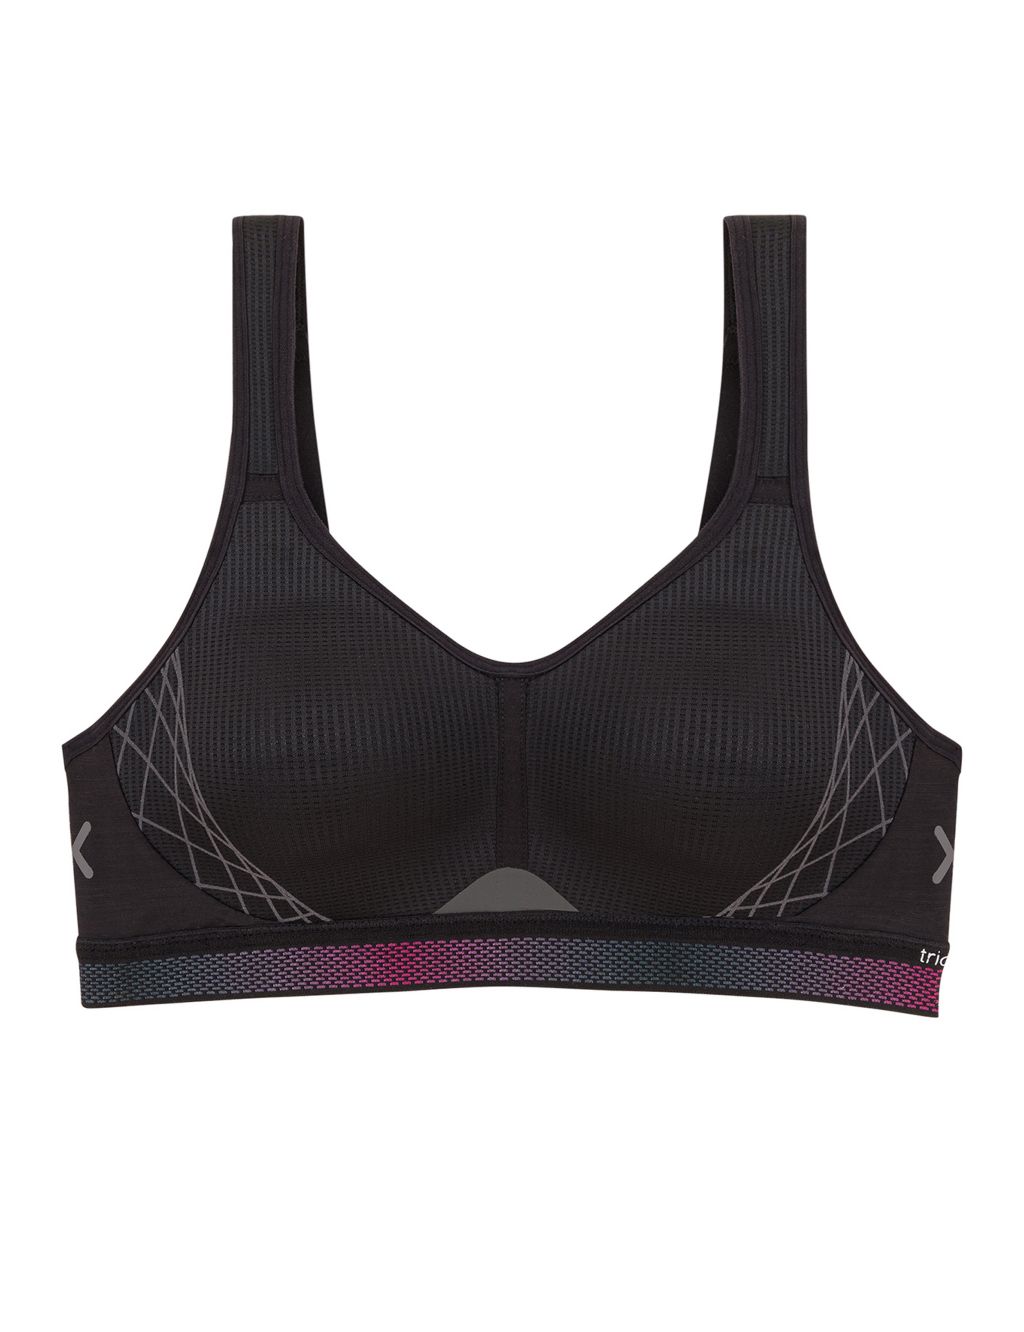 Triaction Cardio Cloud Non Wired Sports Bra image 2